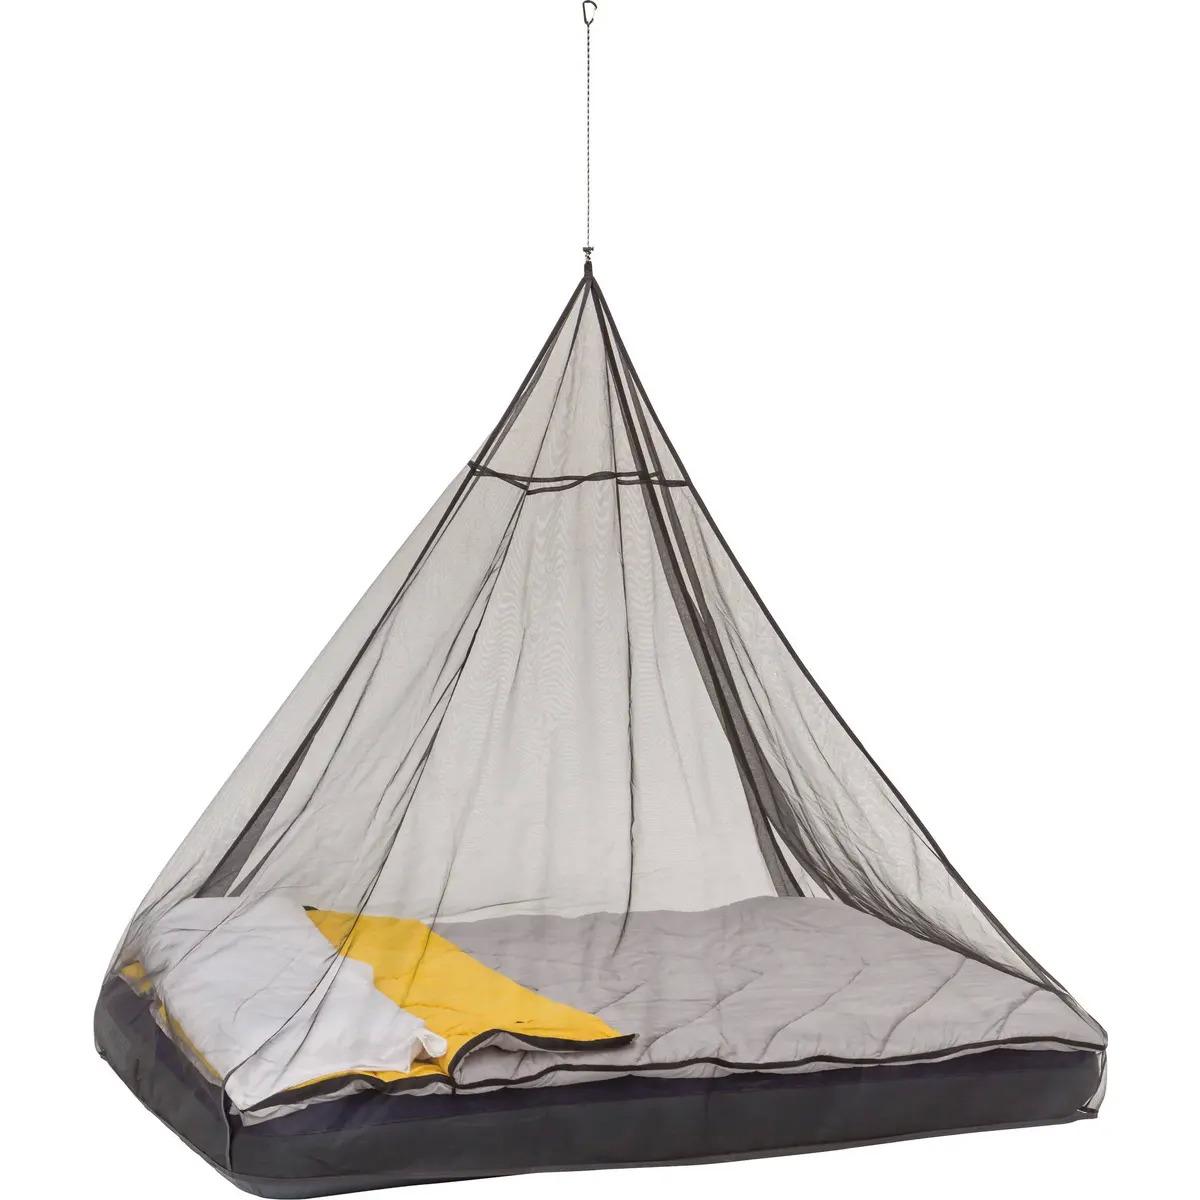 Ozark Trail Mosquito Net for $5